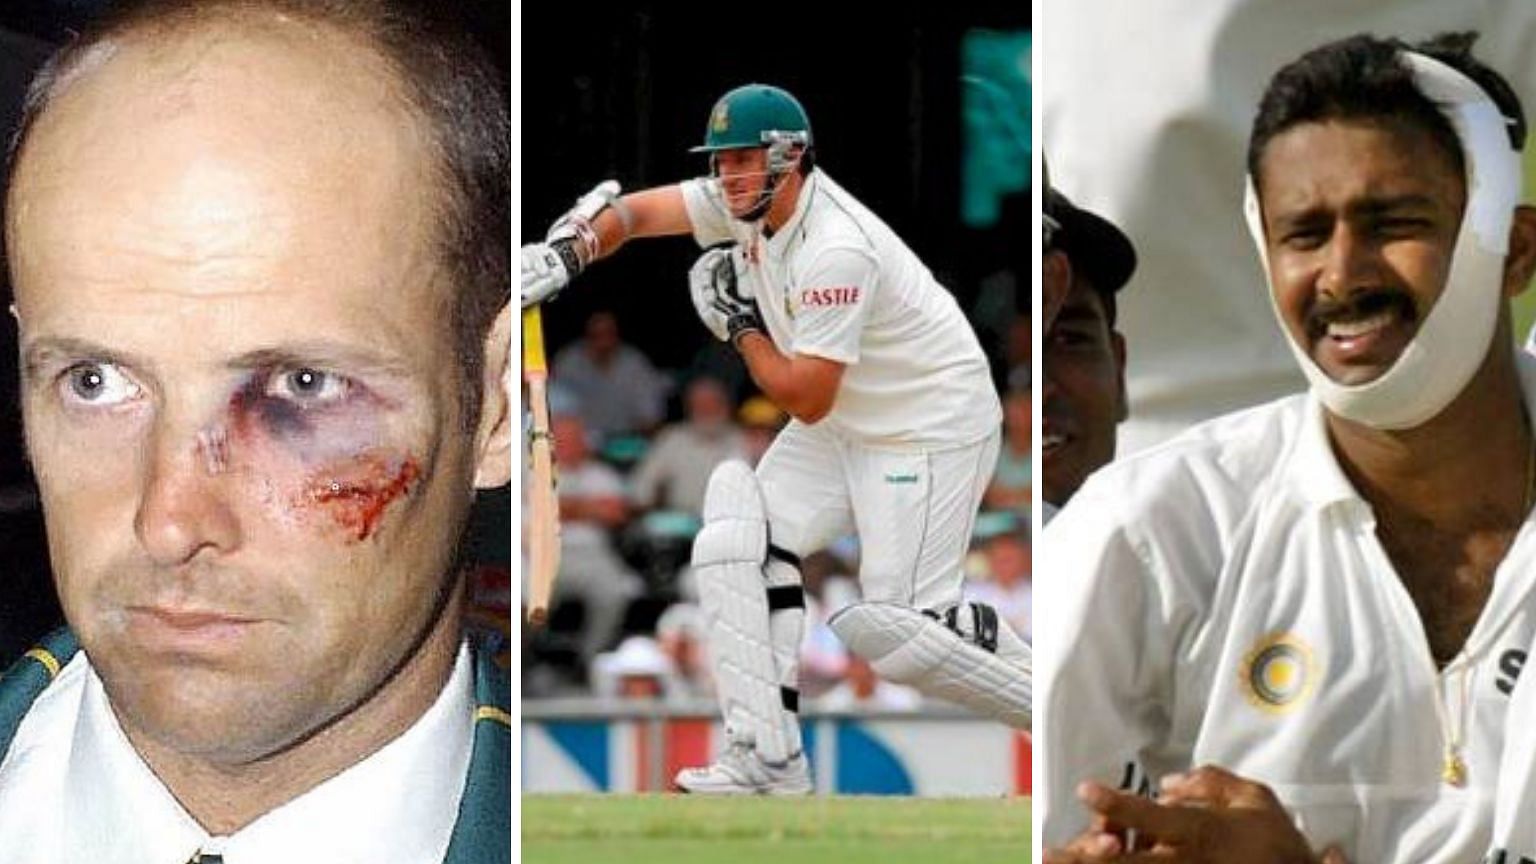 Anil Kumble, Gary Kirsten and Graeme Smith have all played with injuries in their career.